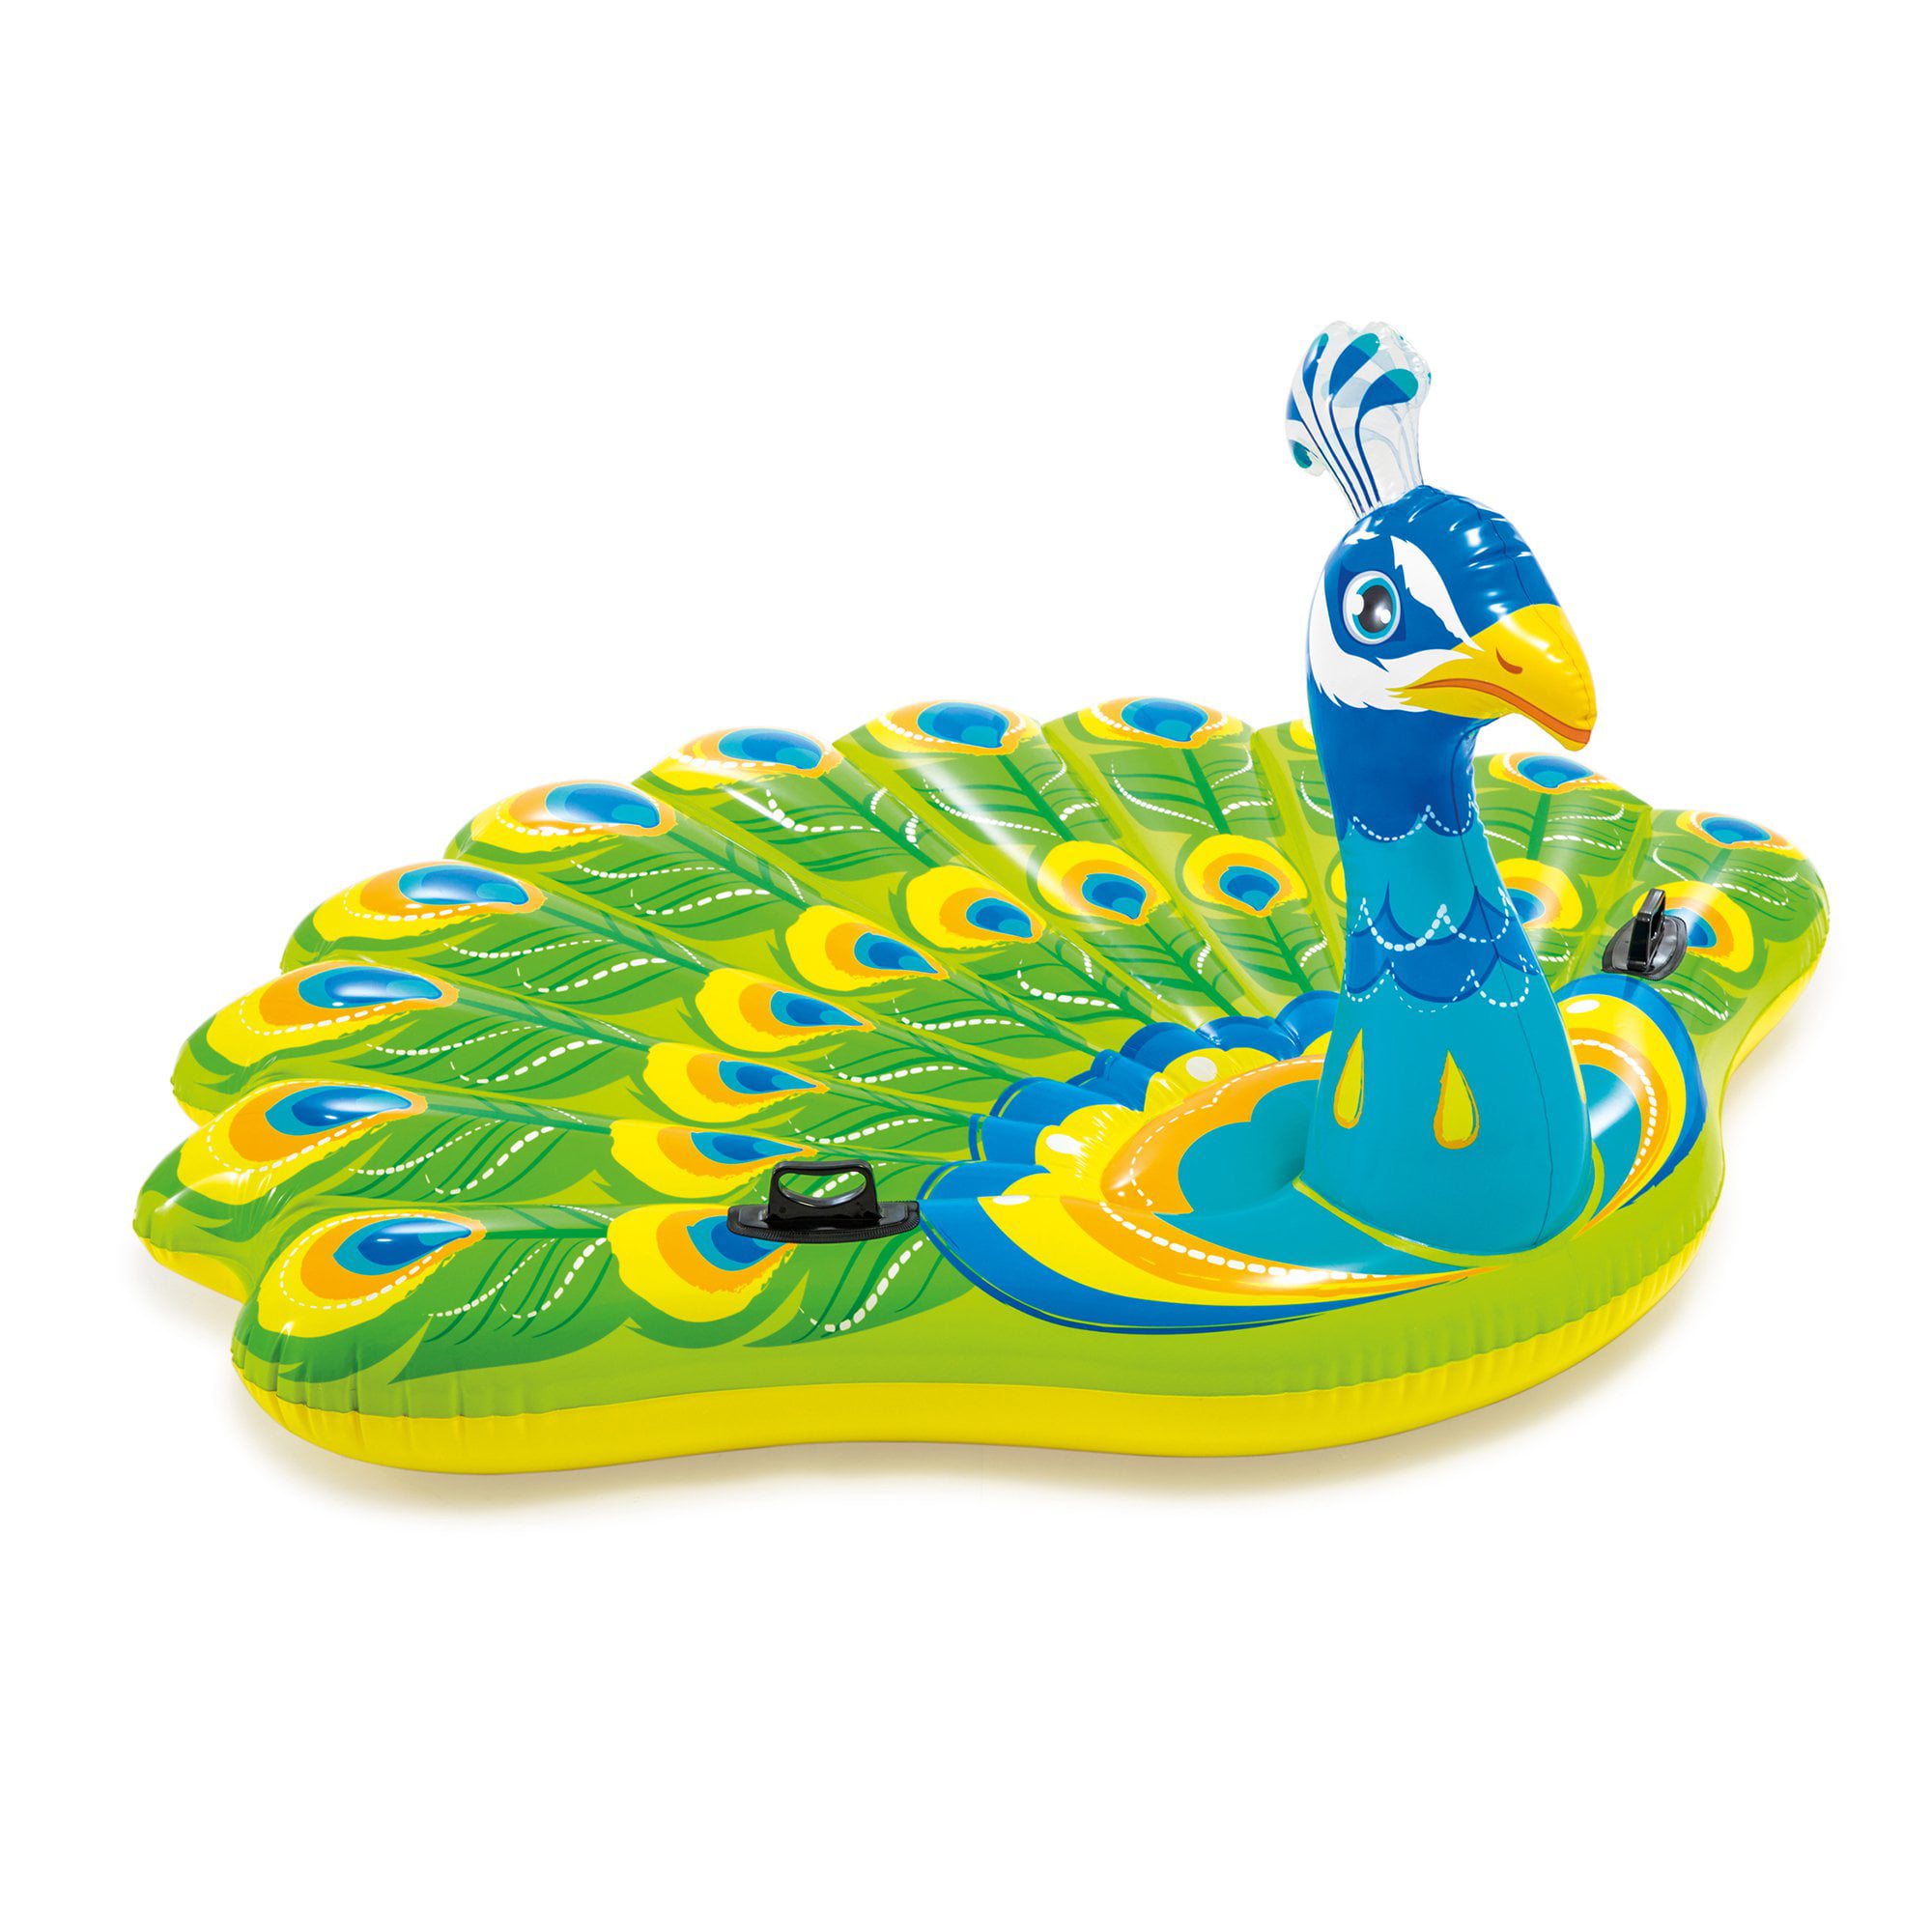 PREMIUM SUMMER LARGE NEW Summer Waves Alligator Ride-On Pool Float 64 in x 36 in